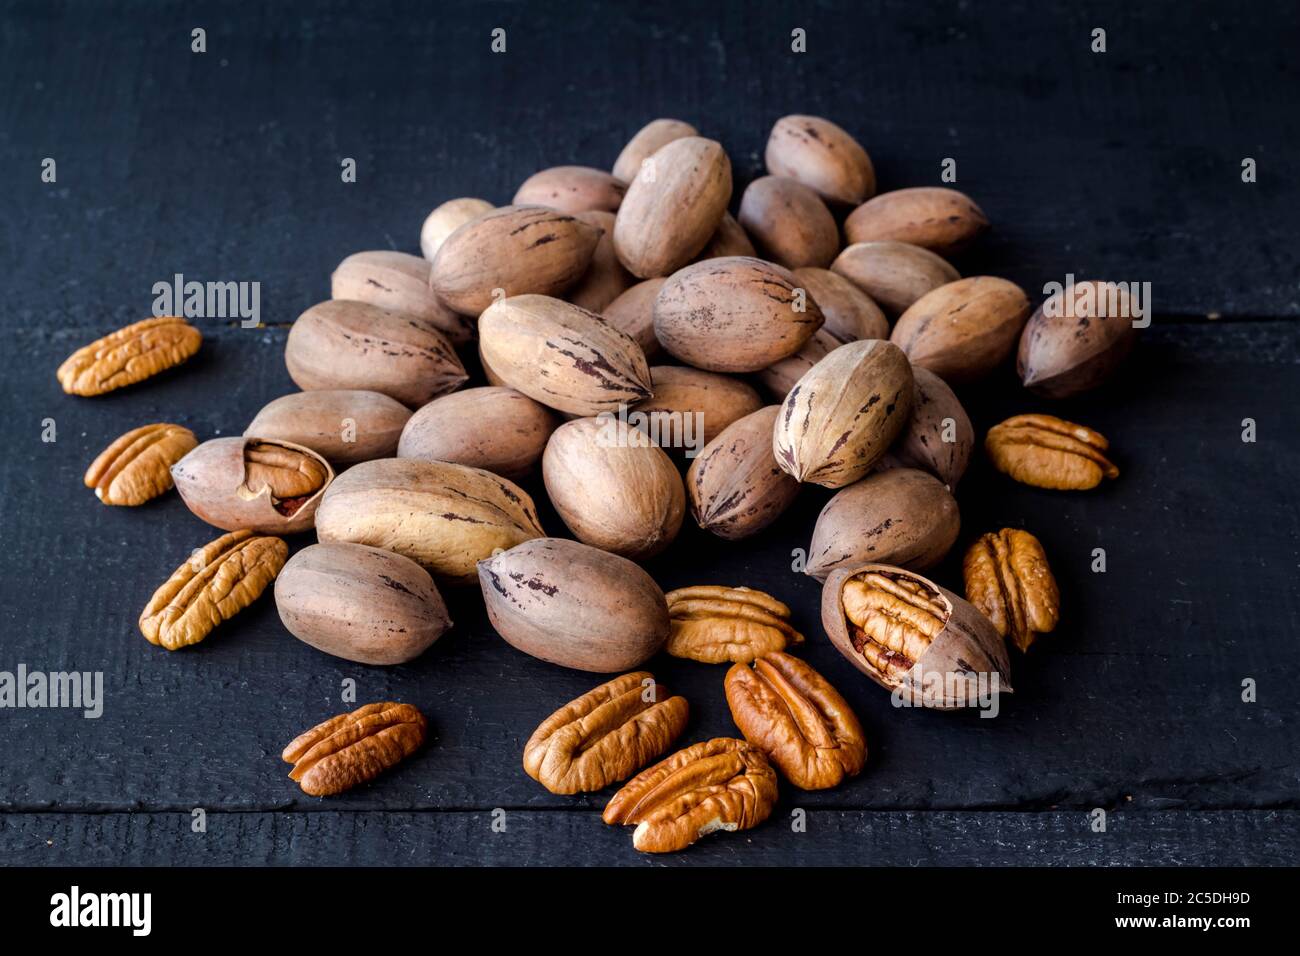 Pecan nuts in shell, cracked and halves isolated on rustic black wooden plank background Stock Photo